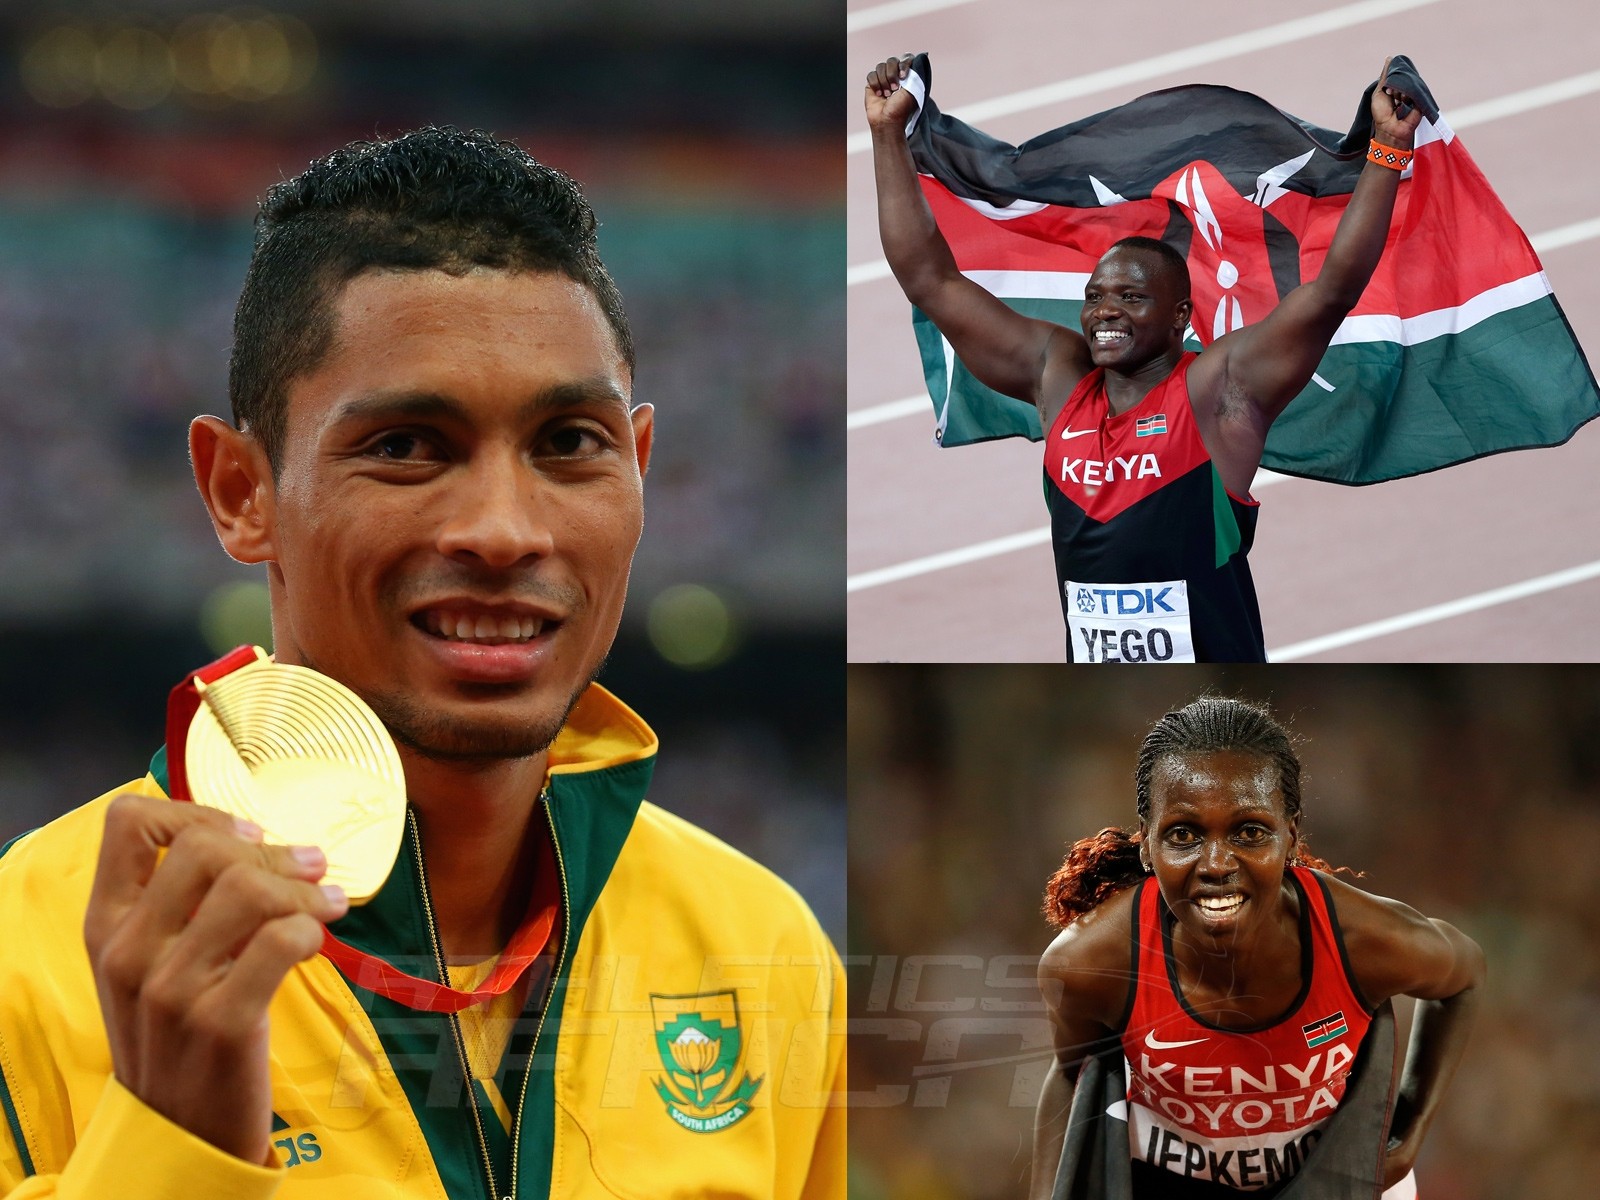 Julius Yego, Wayde van Niekerk and Hyvin Kiyeng on day 5 at the 2015 IAAF World Championships in Beijing, China / Getty Images for the IAAF